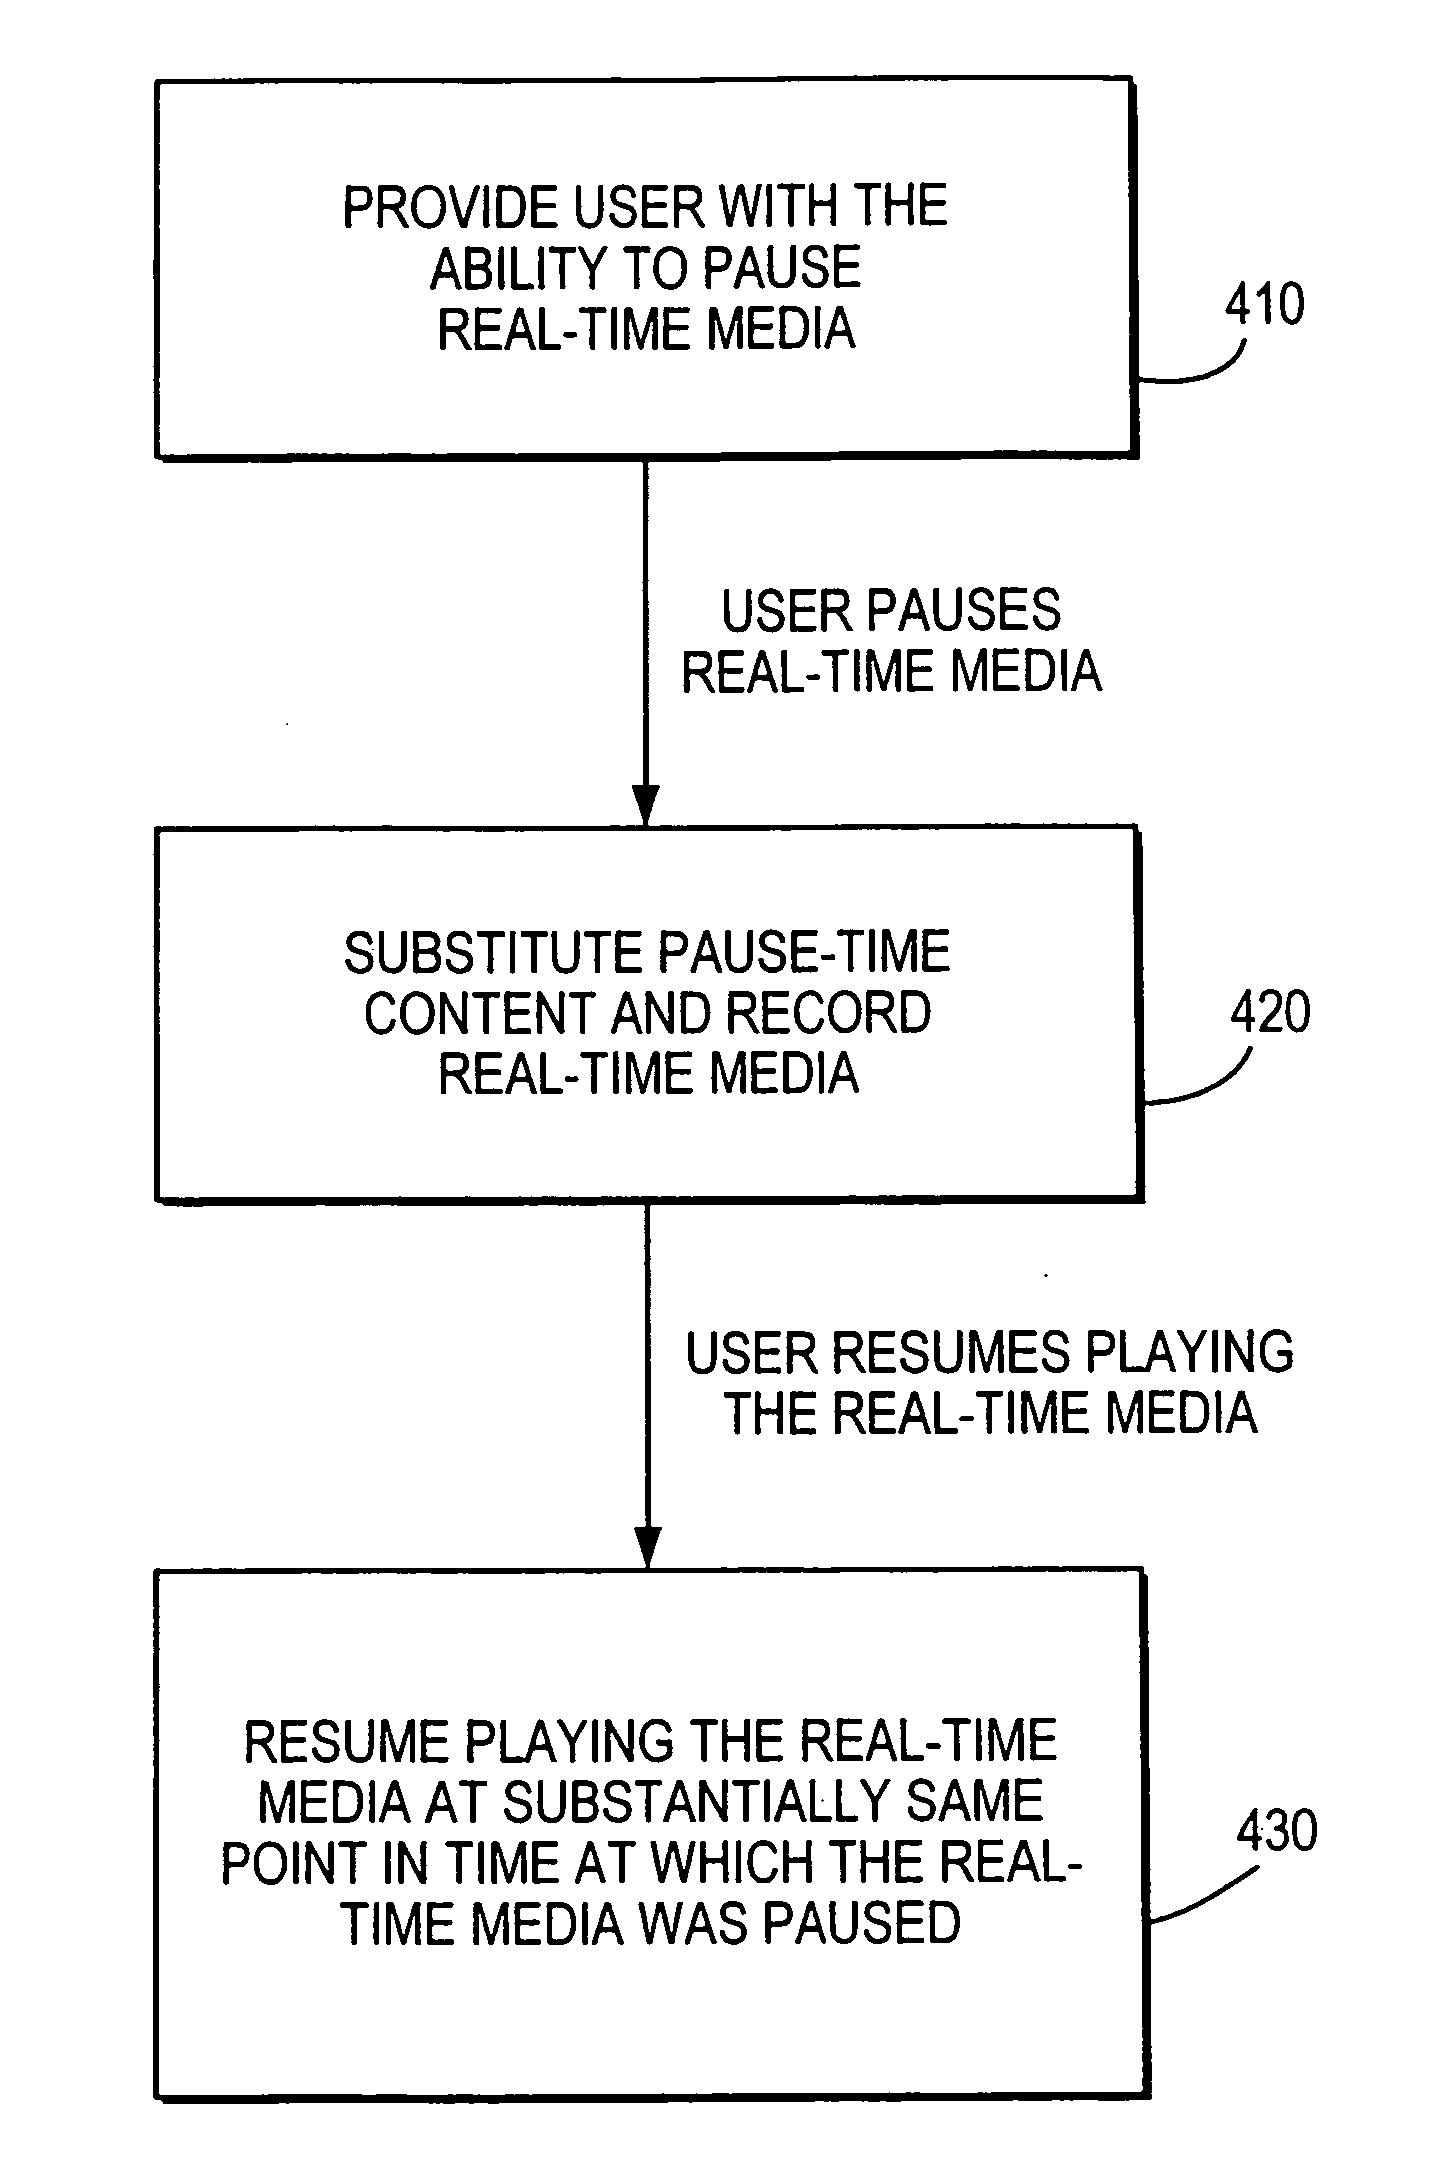 Interactive media system and method for presenting pause-time content